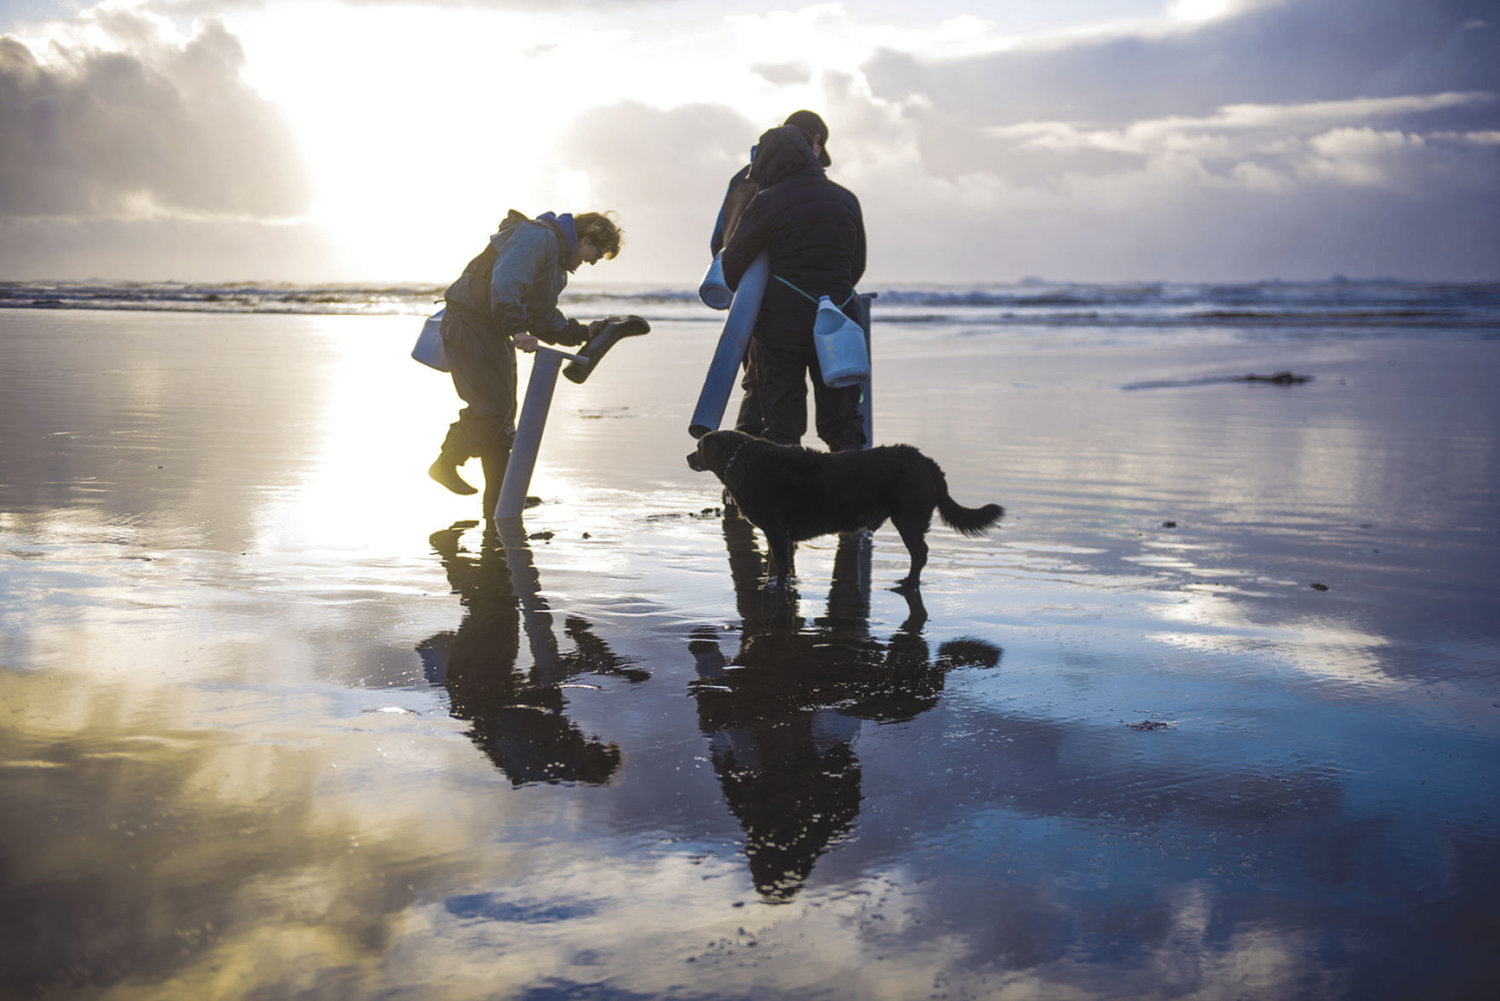 Washington Department of Fish and Wildlife (WDFW) shellfish managers on Wednesday confirmed razor clam digging reopens at Copalis Beach on Friday, Feb. 3, followed by additional opportunities on Feb. 5 and Feb. 7.